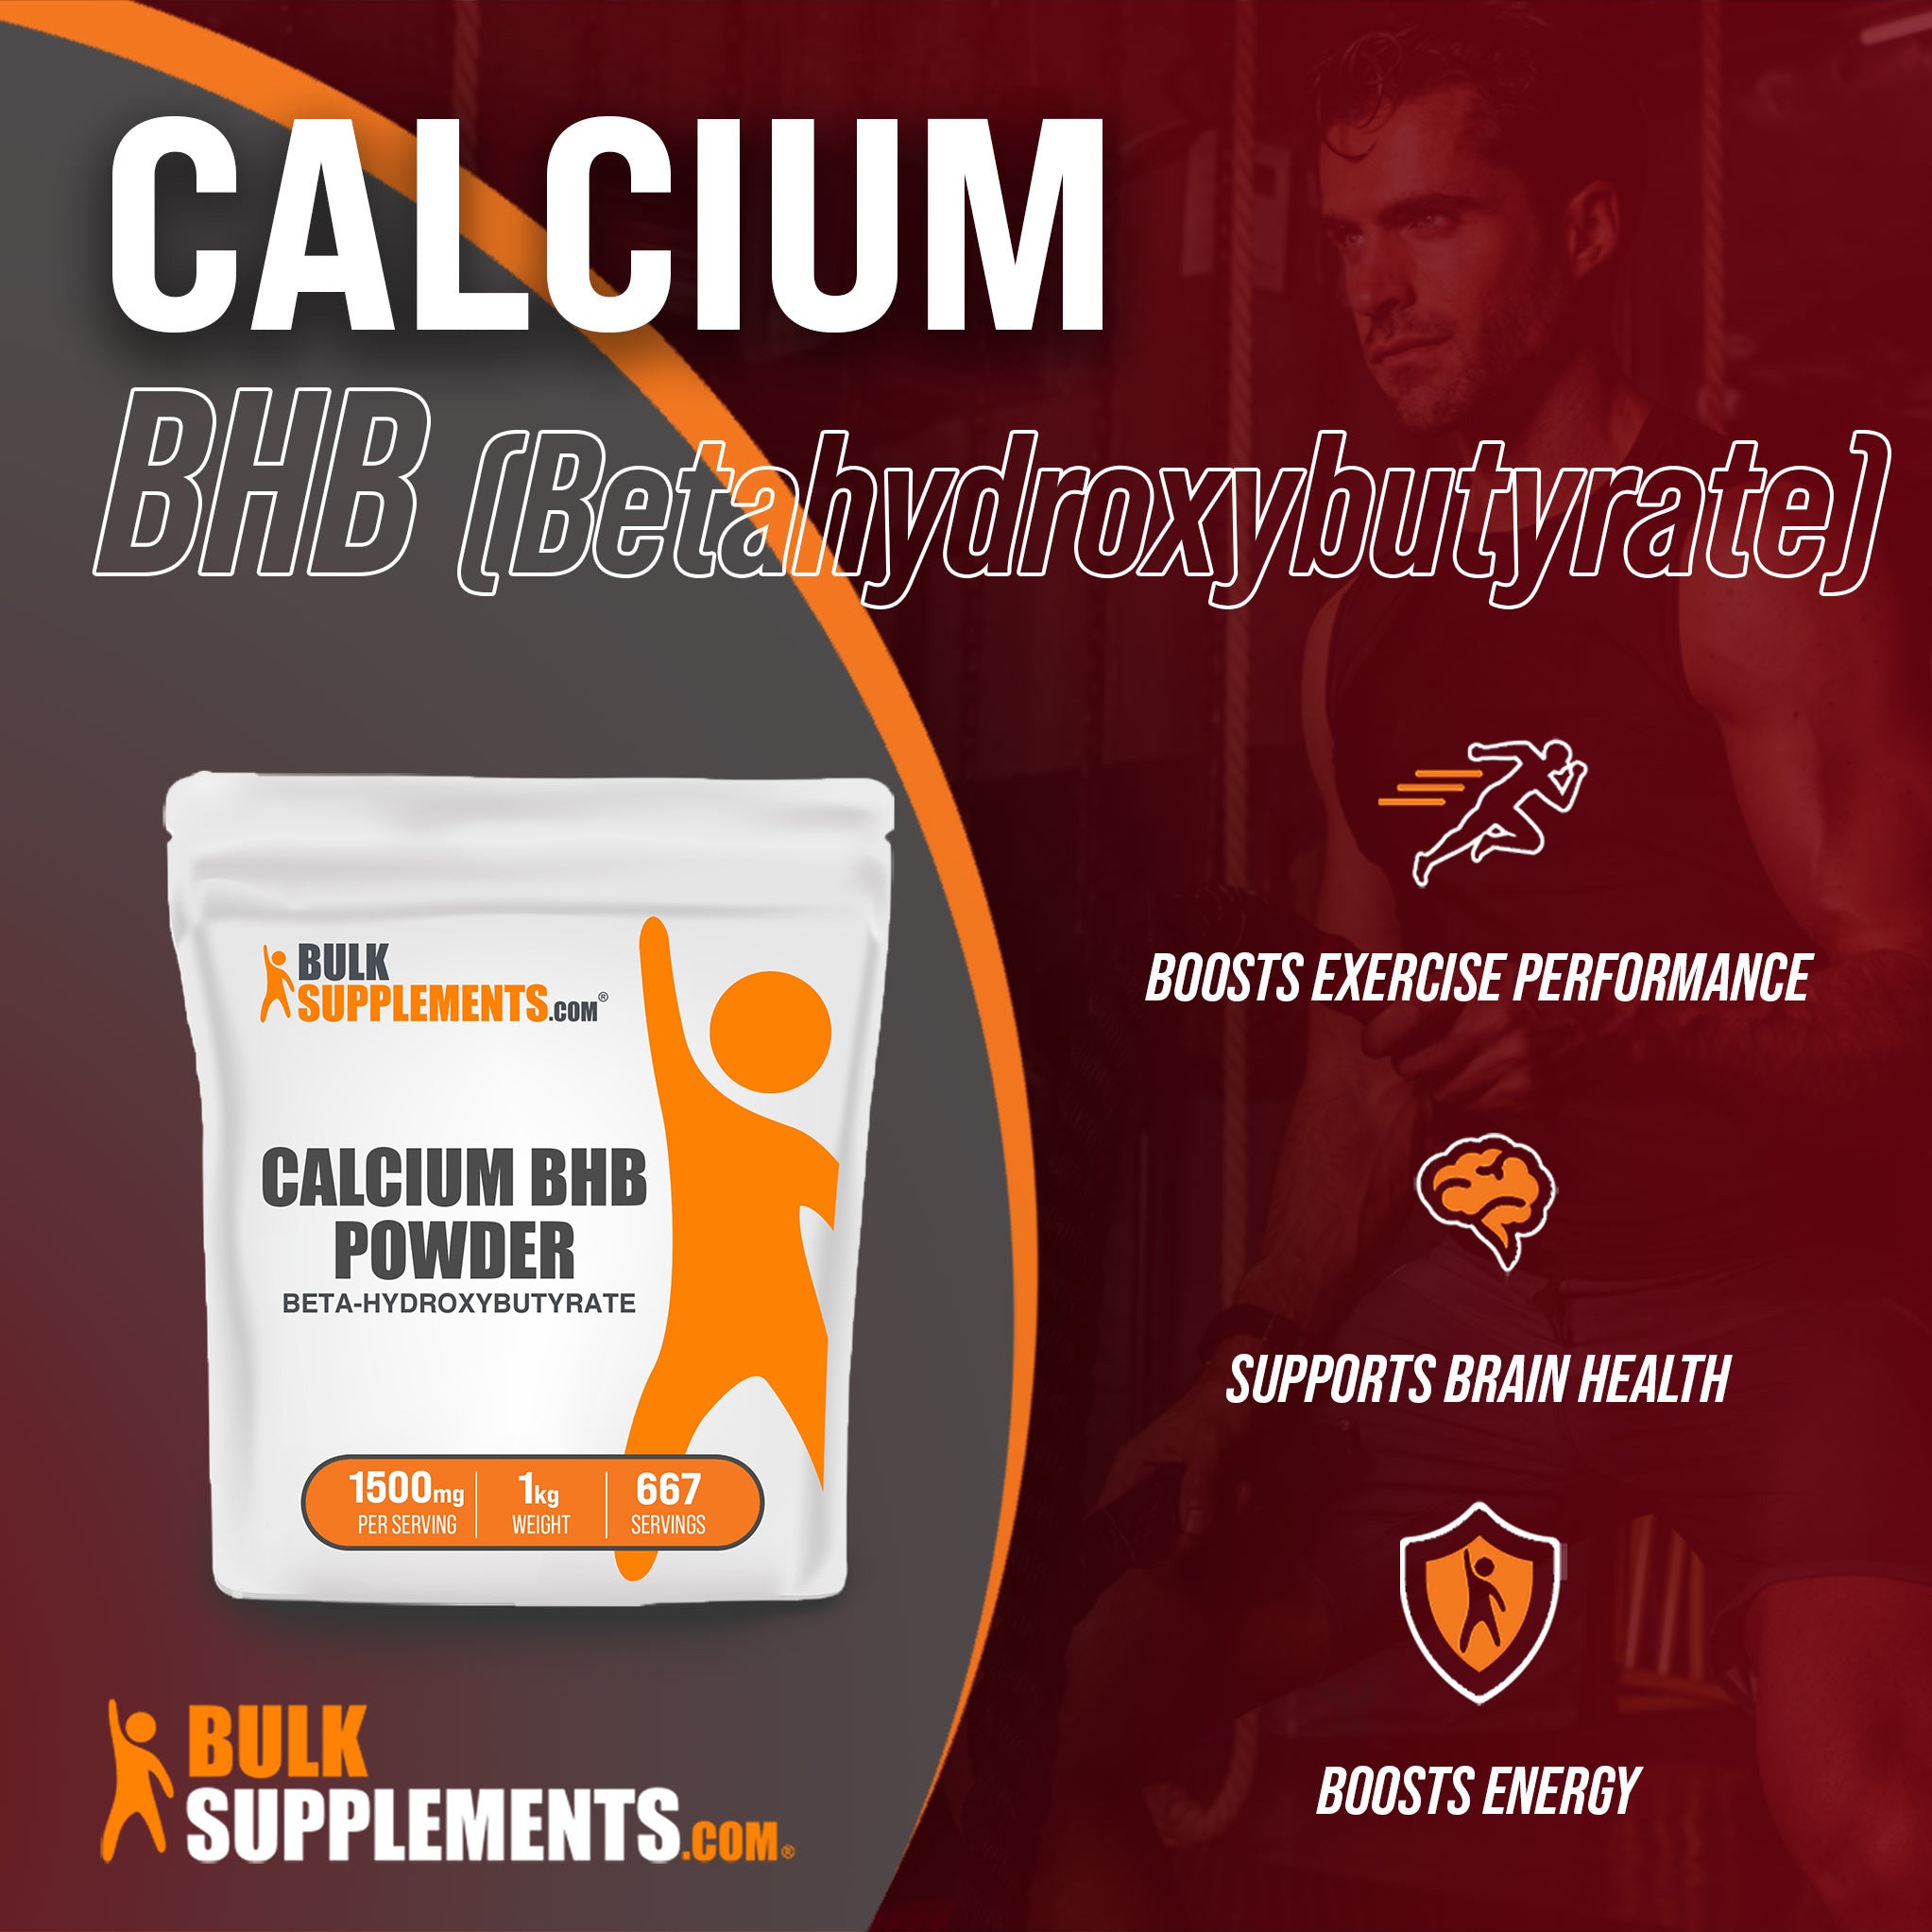 Benefits of Calcium BHB (Beta-hydroxybutyrate); Boosts exercise performance, supports brain health, boosts energy